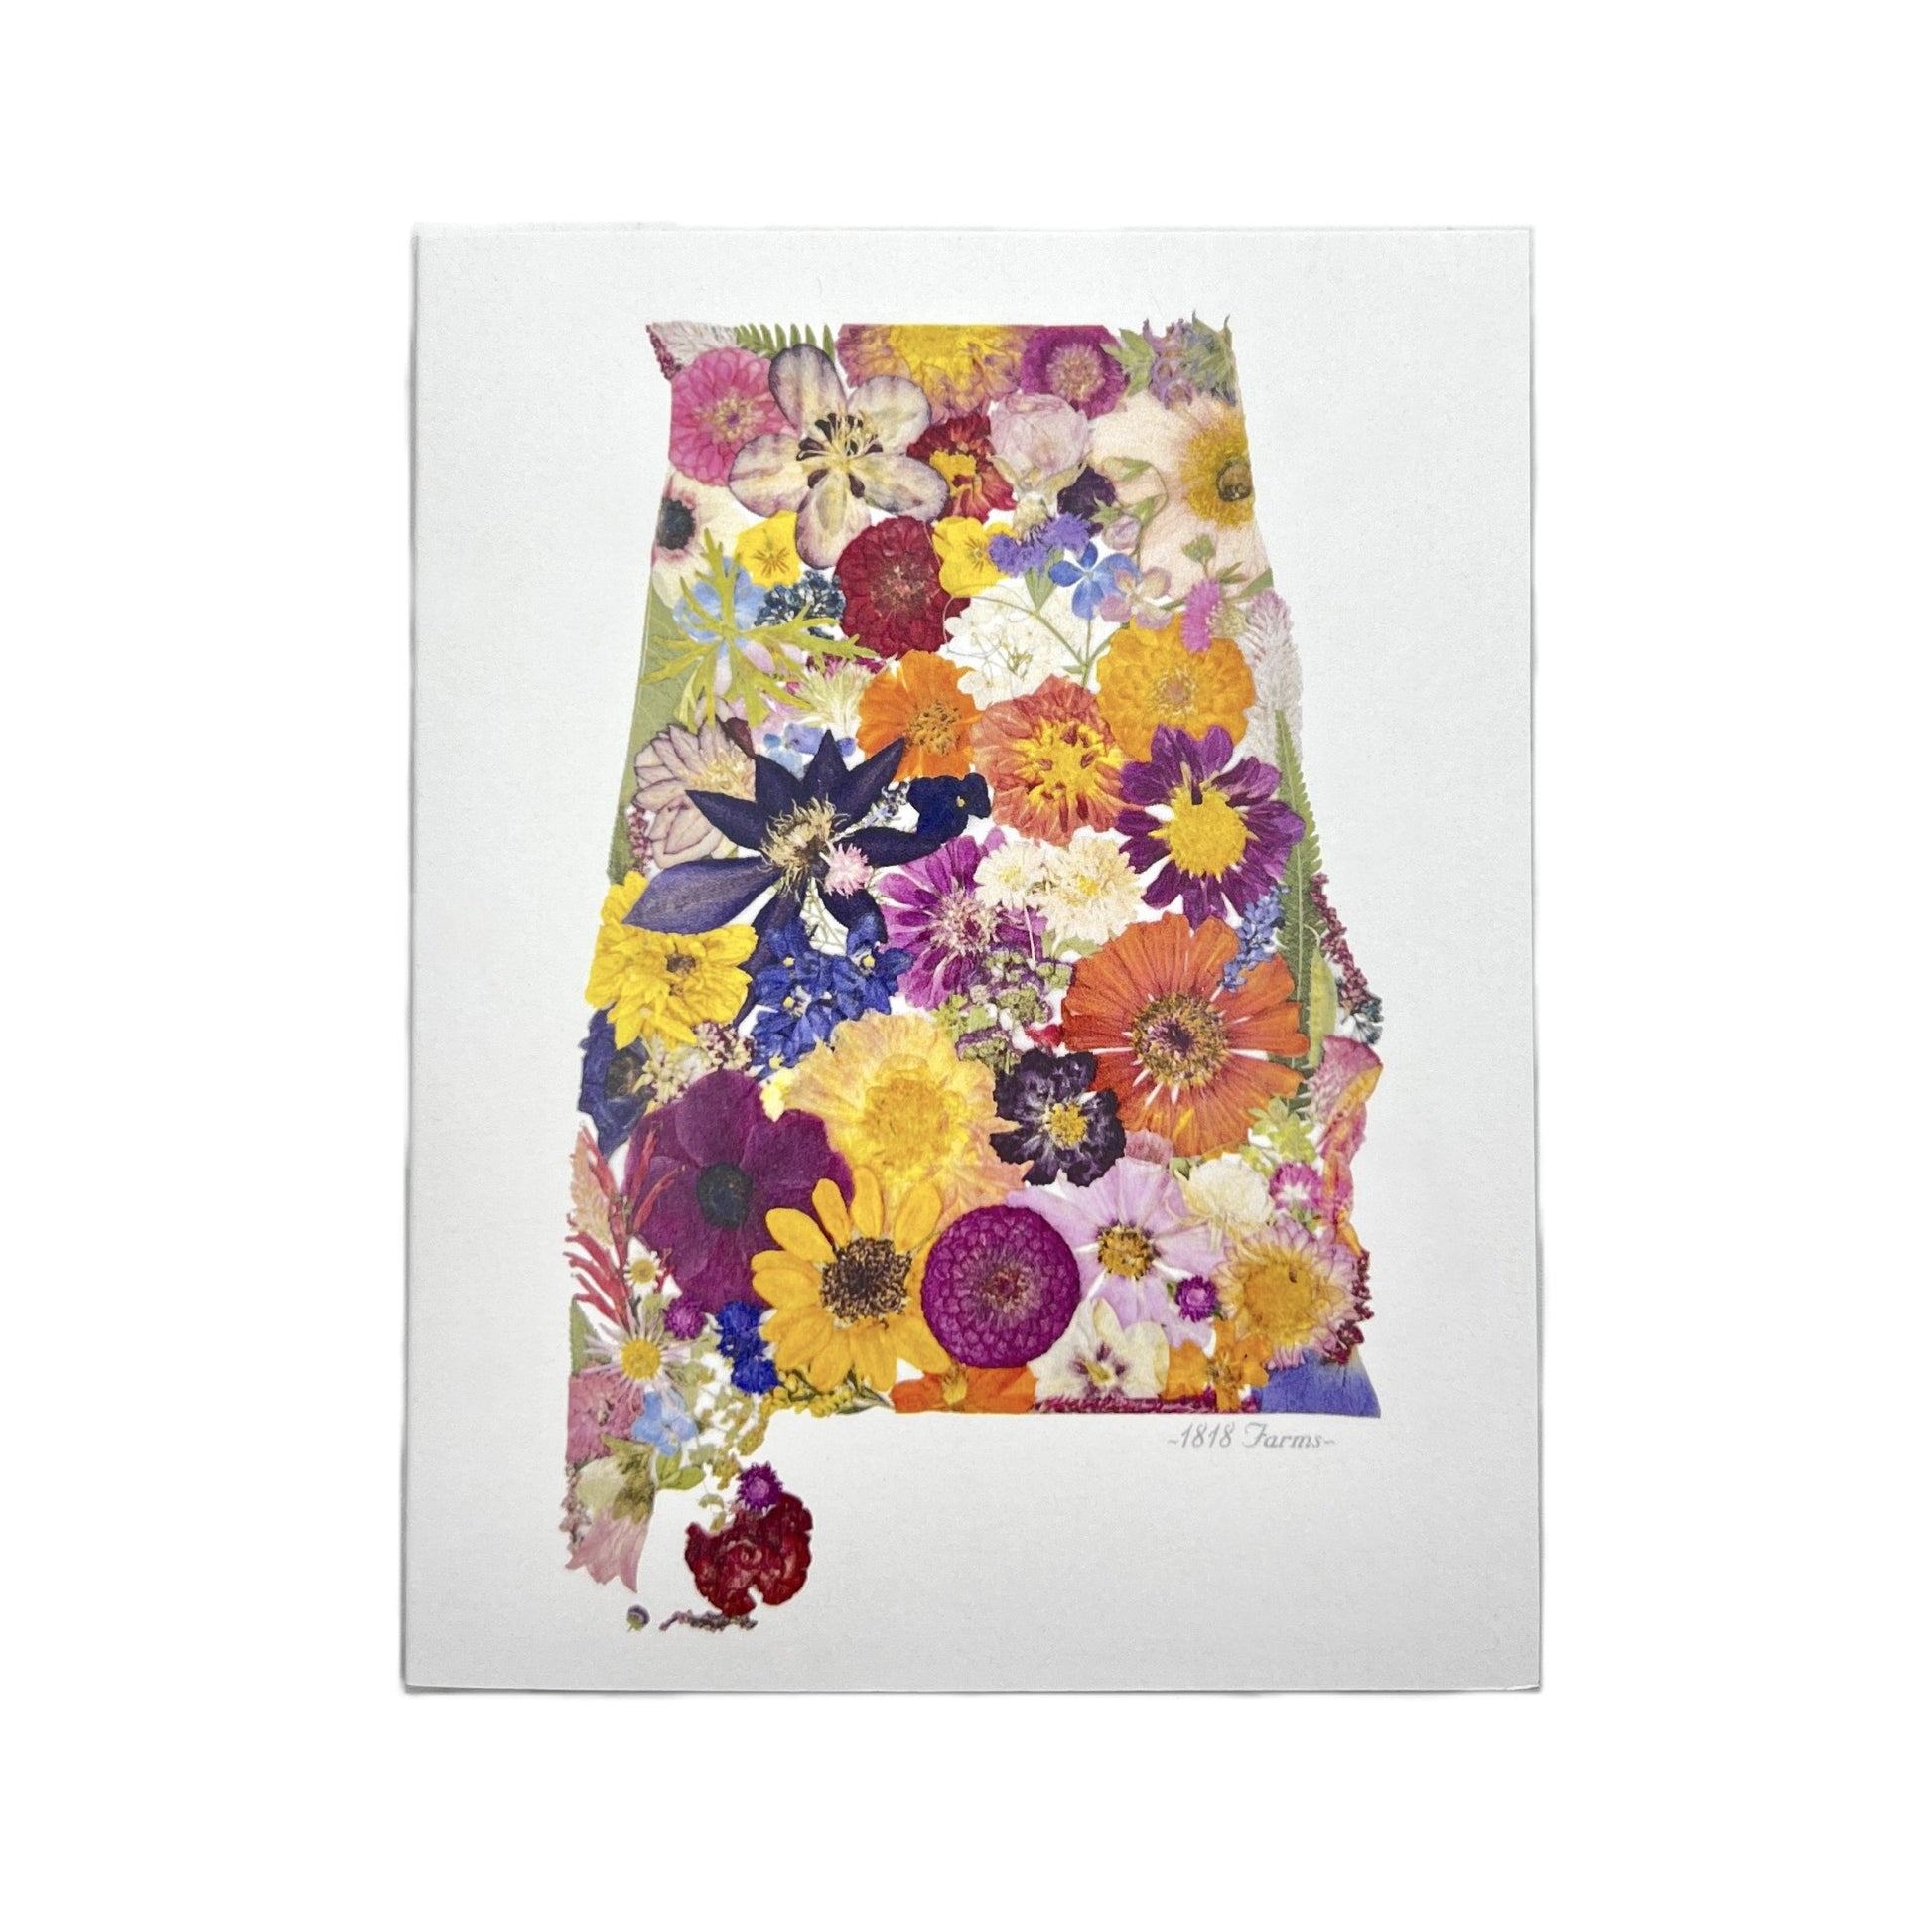 Alabama Themed Notecards (Set of 6) Featuring Dried, Pressed Flowers - "Where I Bloom" Collection Notecard 1818 Farms   